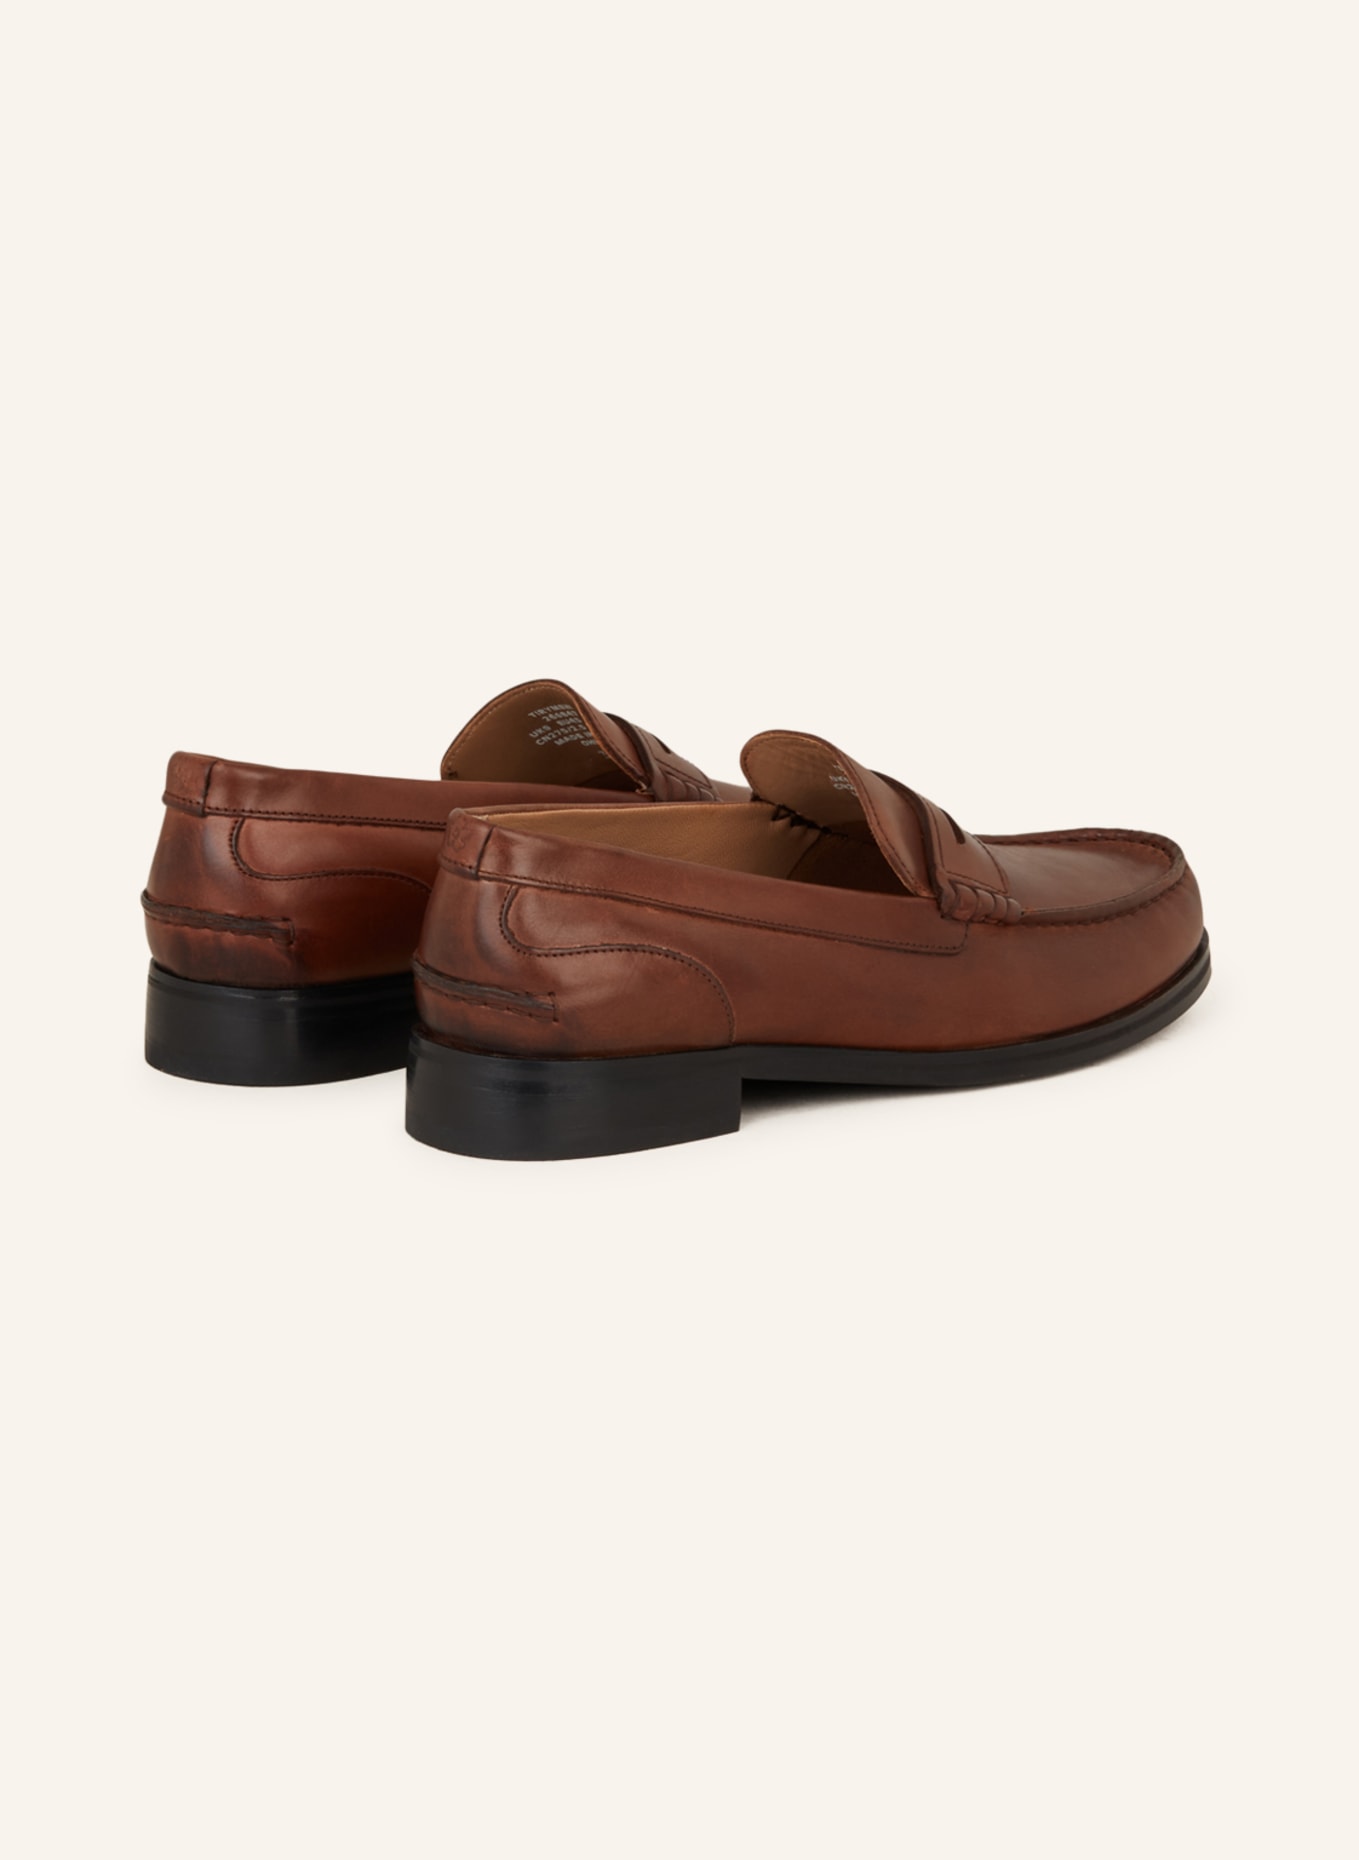 TED BAKER Penny-Loafer TIRYMEW, Farbe: BRAUN (Bild 2)